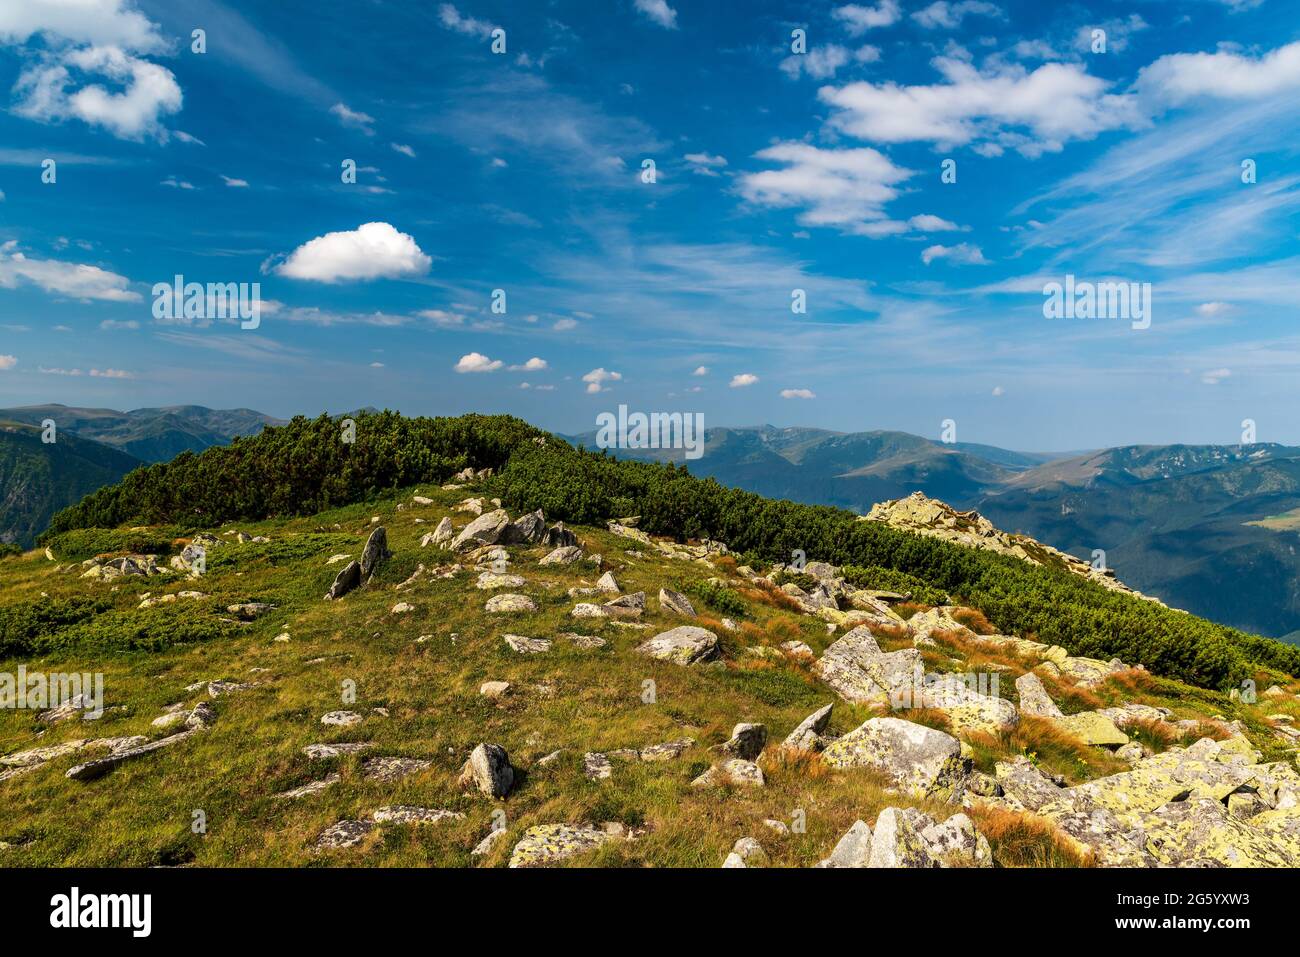 Amazing view from Varful Zlata hill summit above Zanoaga lake in Retezat mountains in Romania with many hills and blue sky with clouds Stock Photo